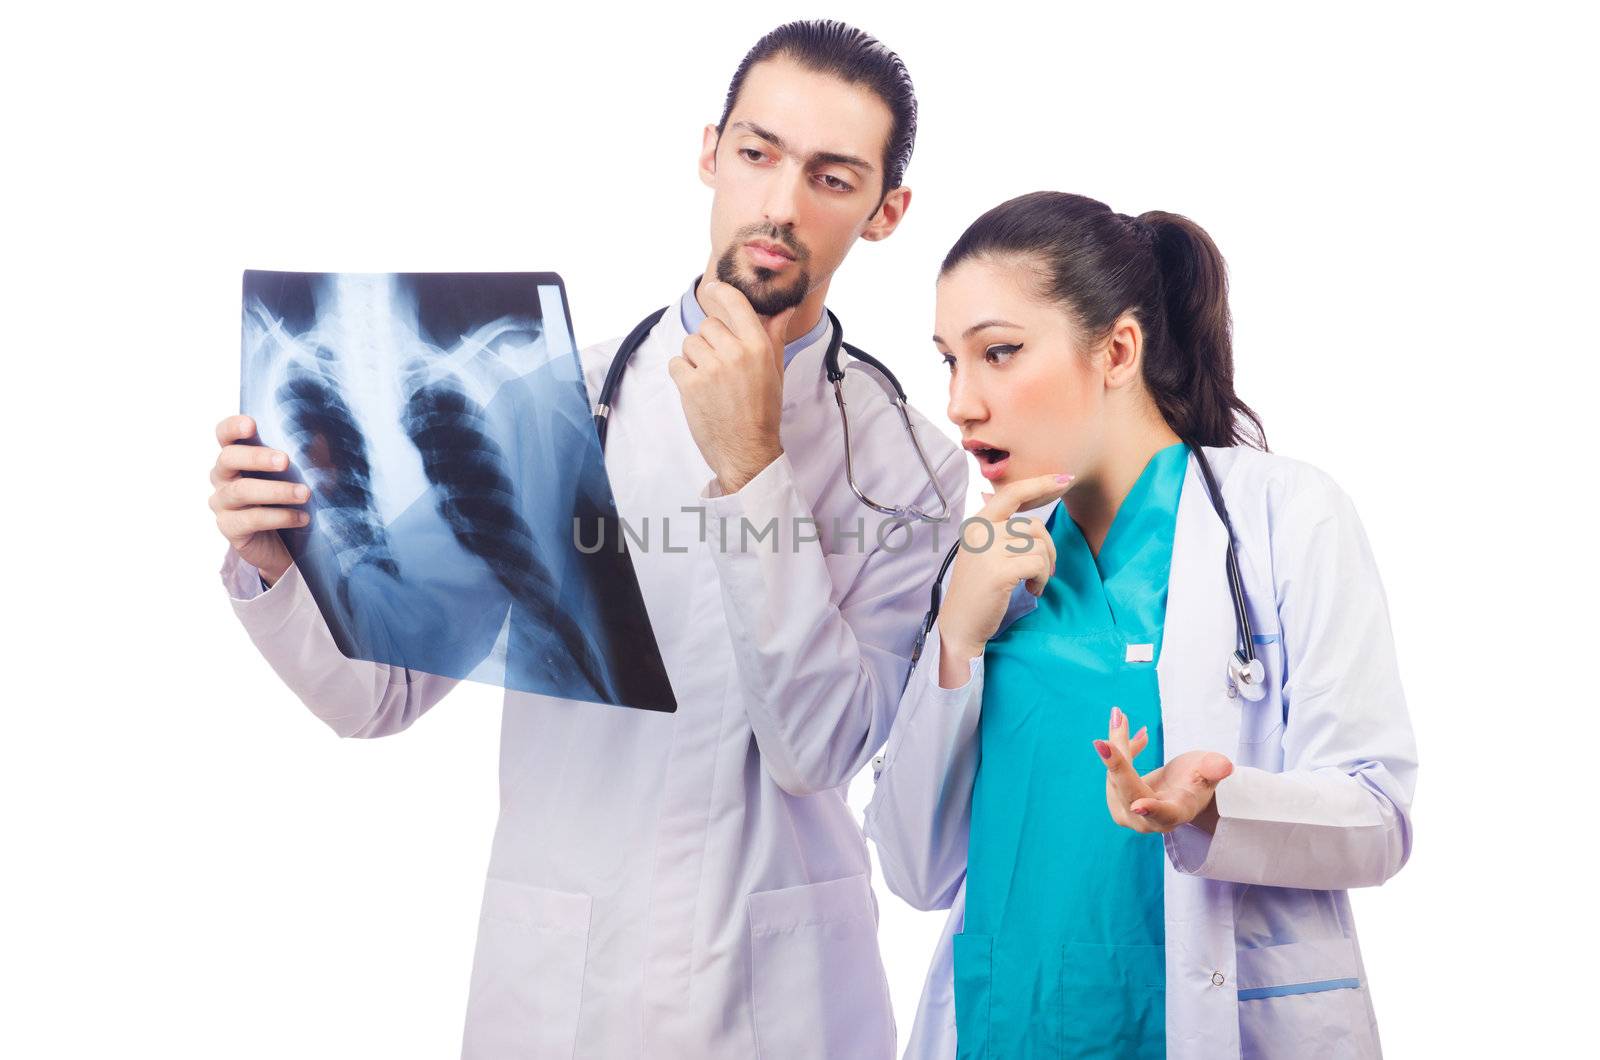 Two doctors looking at x-ray image on white